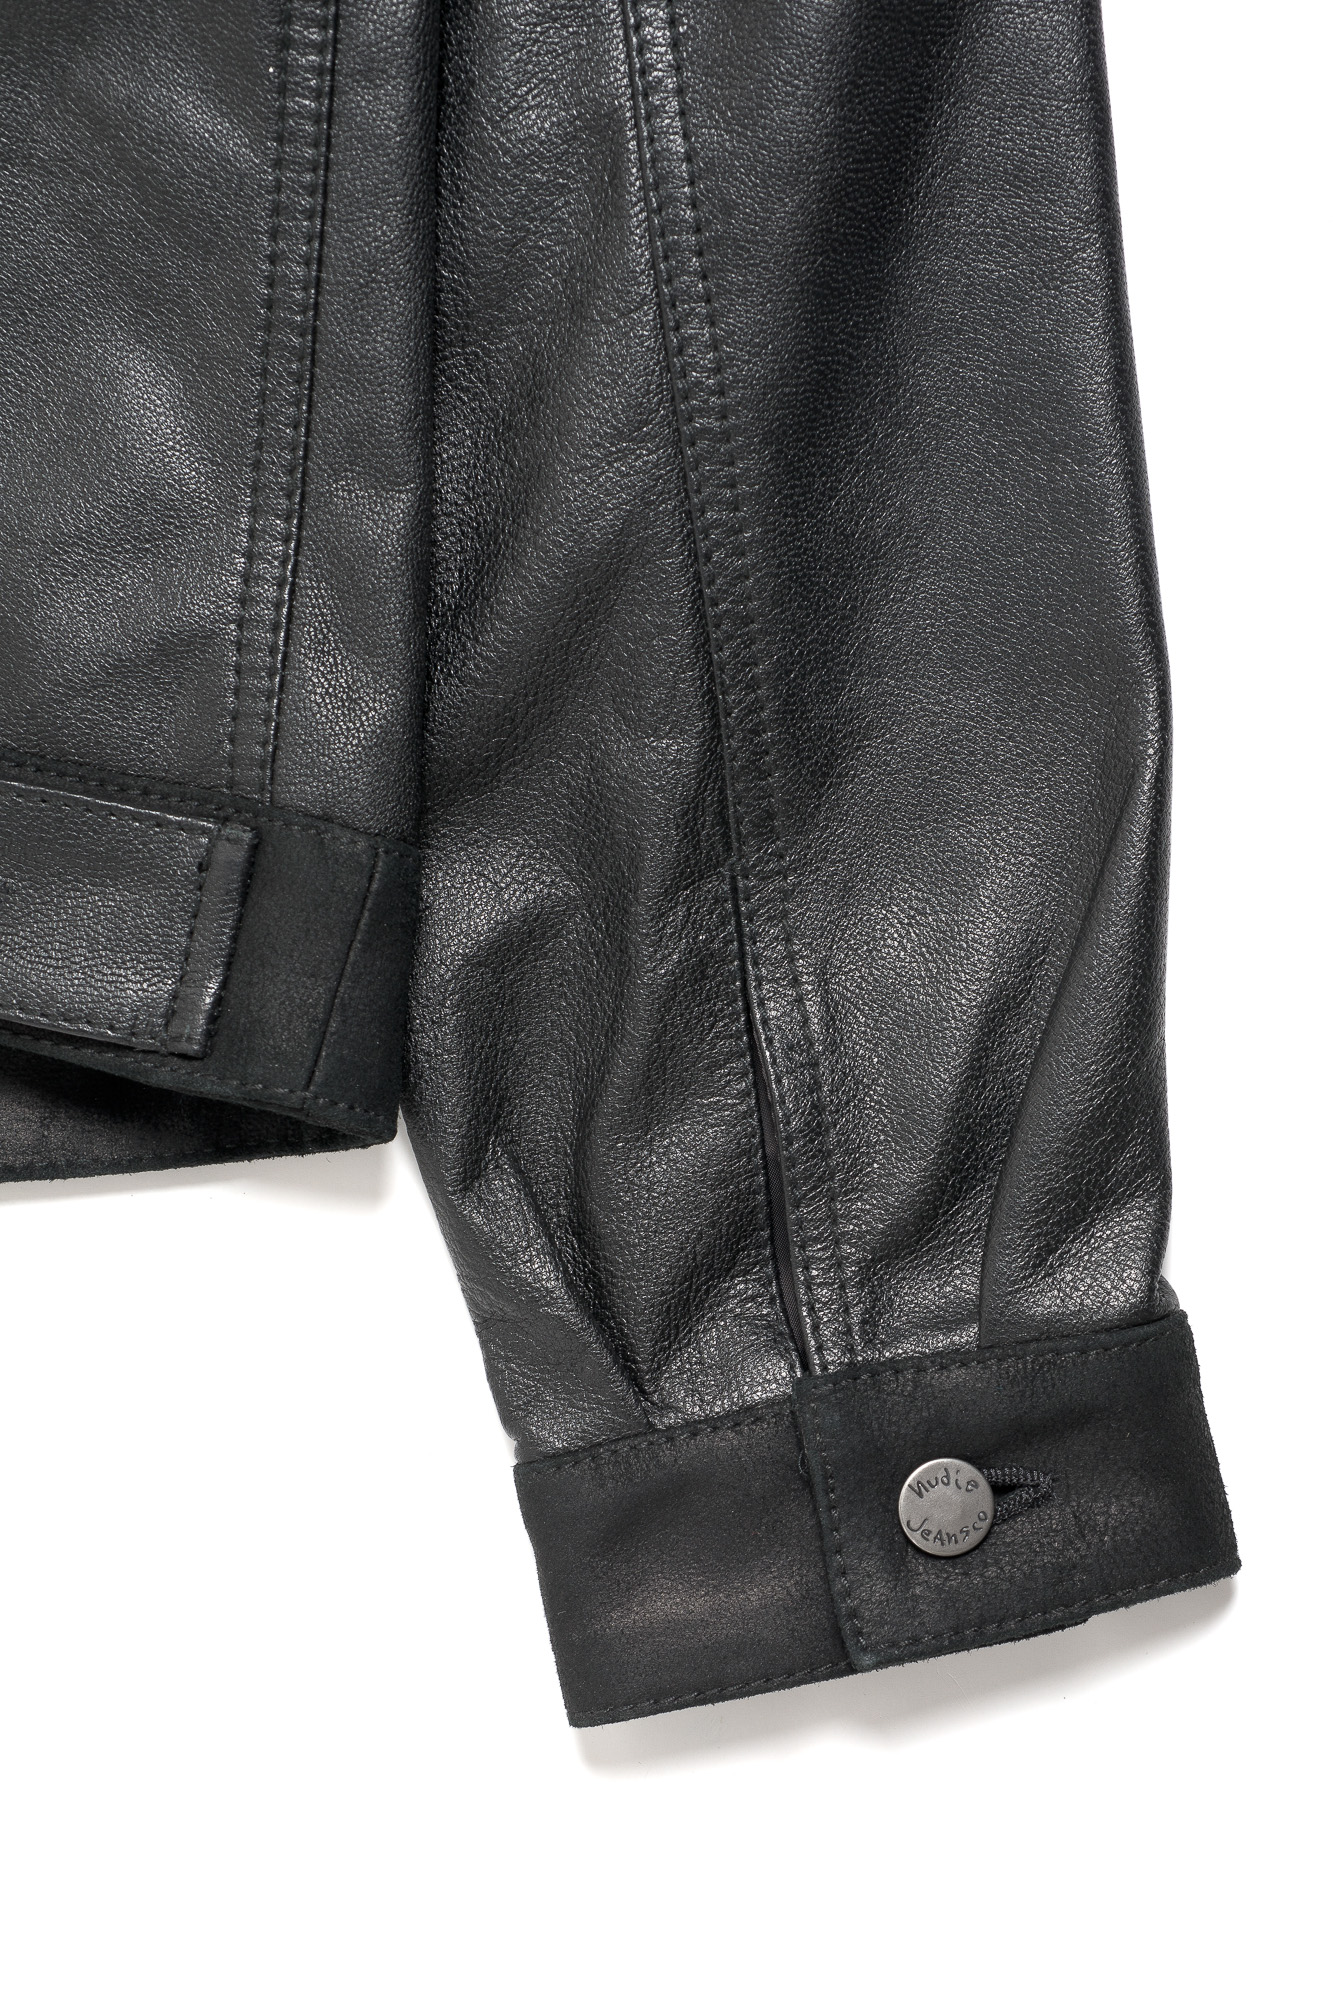 Perry Leather _ Crust Jkt Black 160339 13